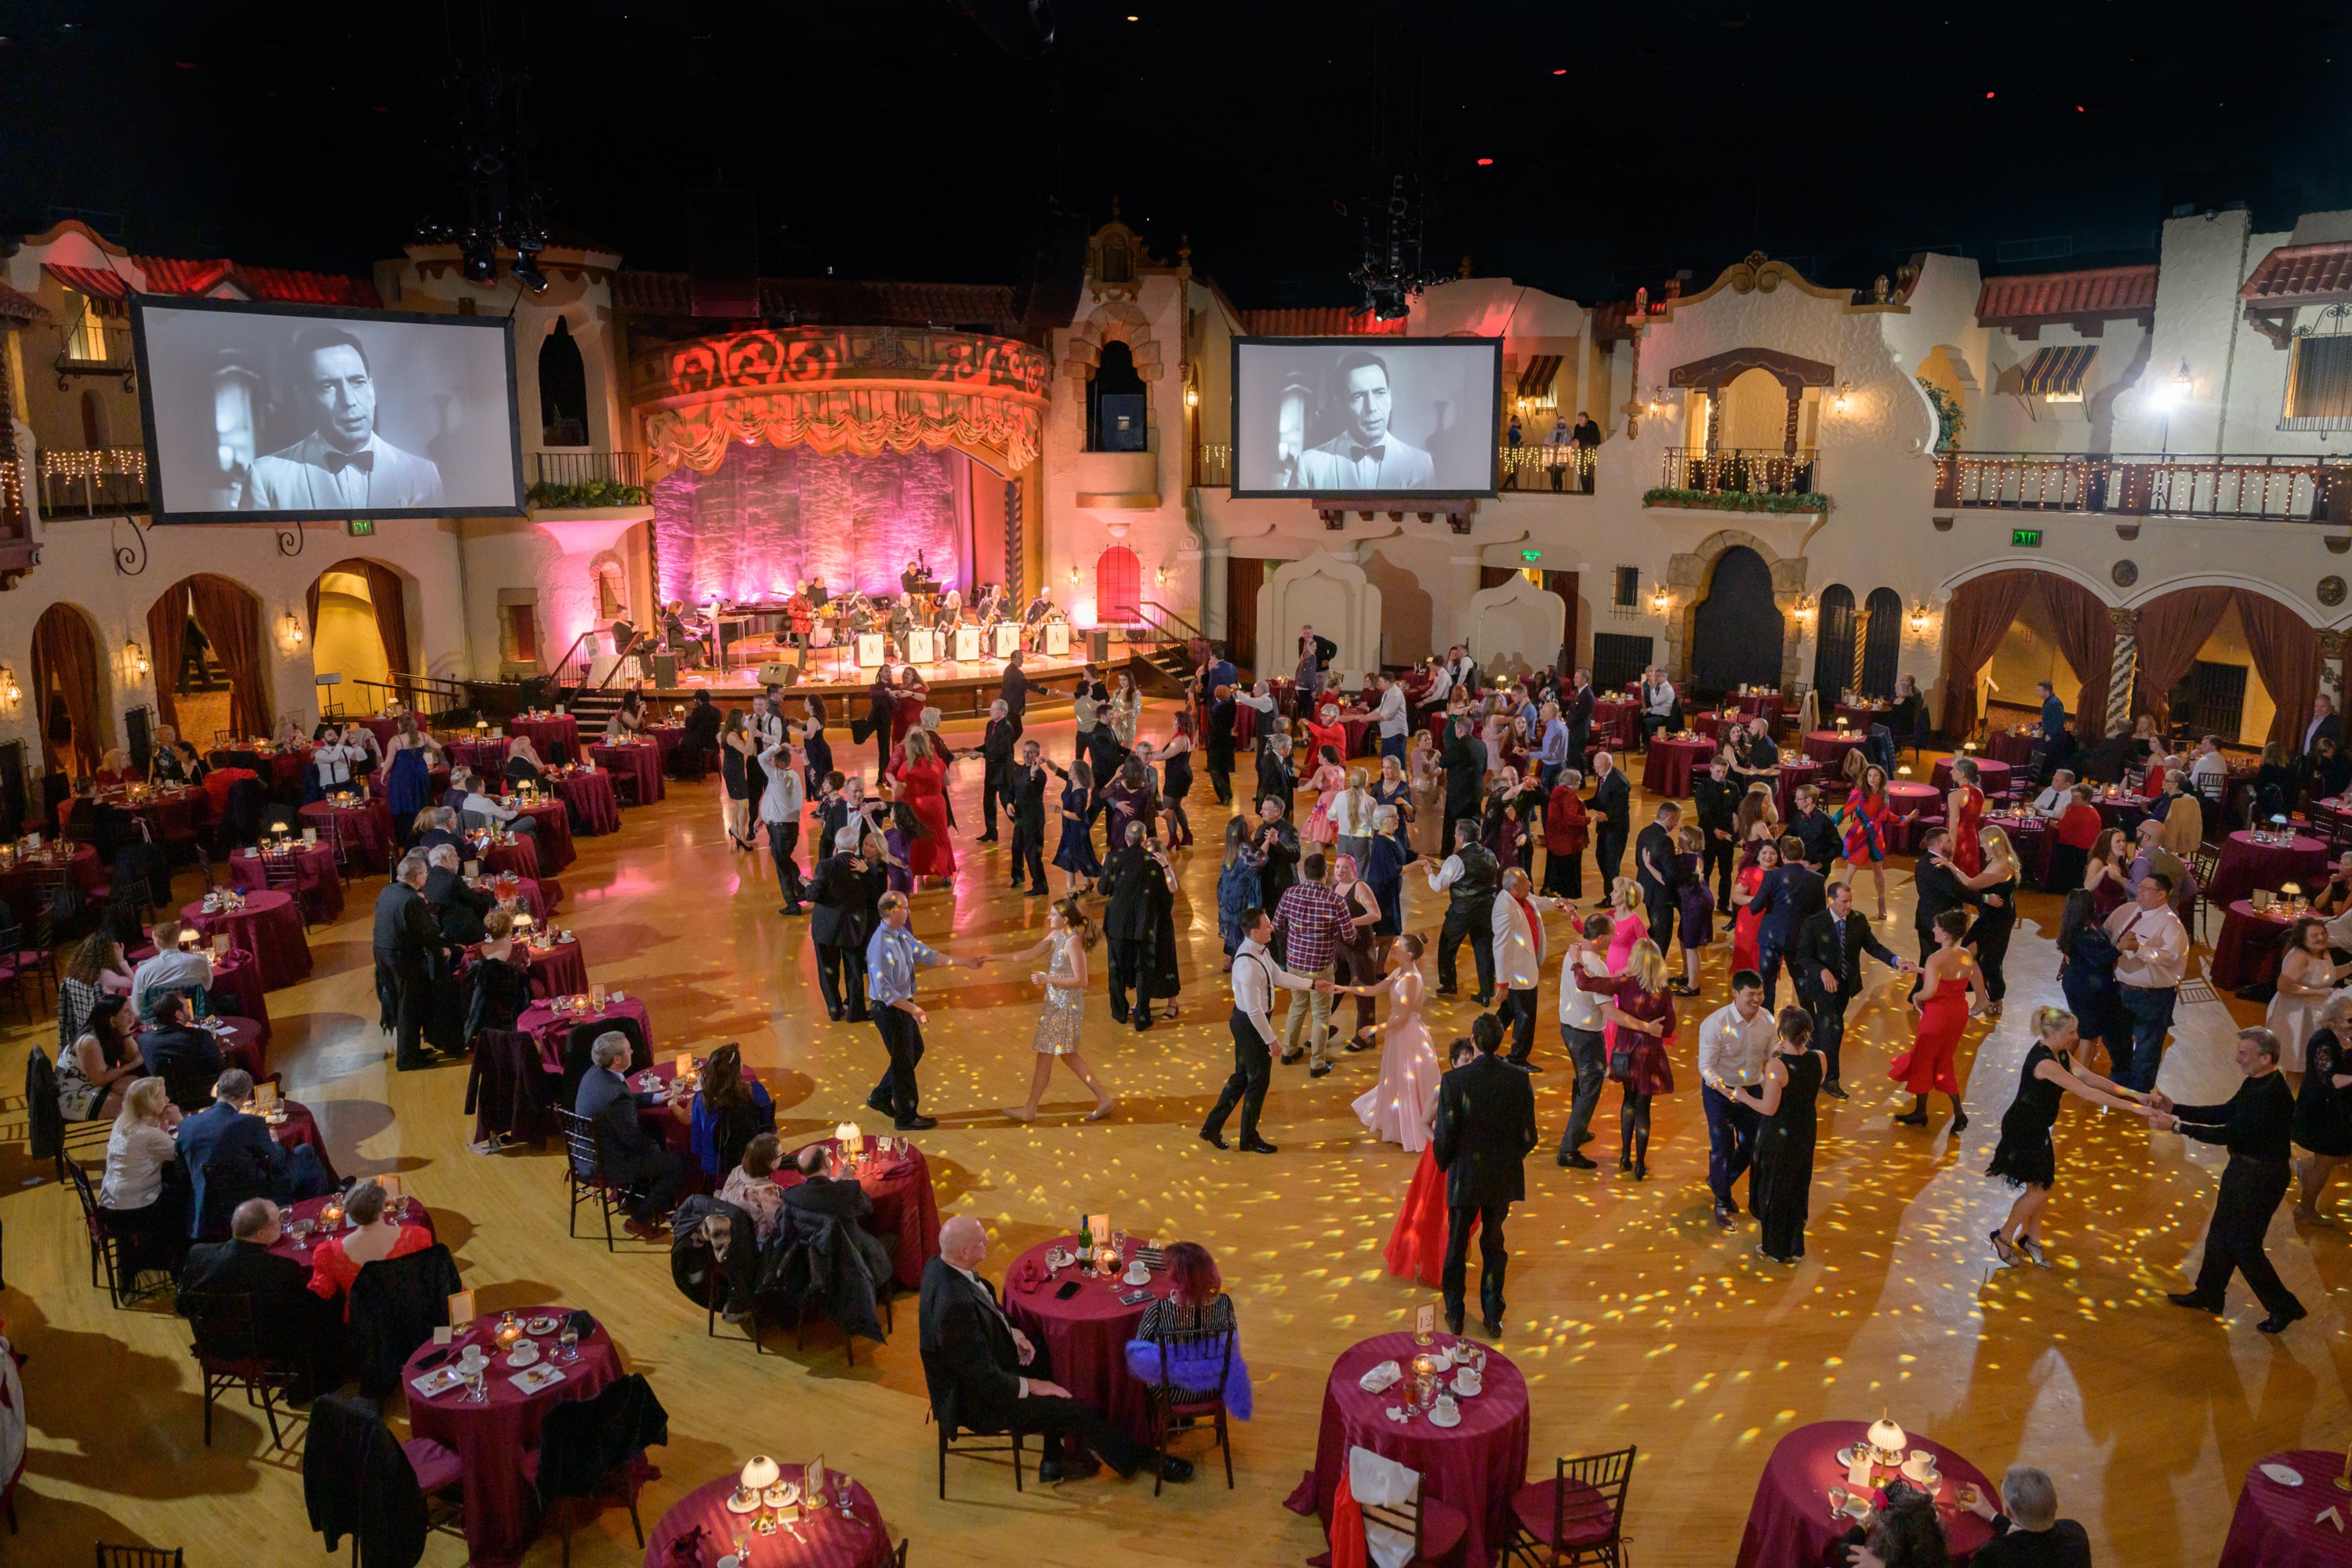 The Valentine’s Day Dinner and Dance at the Indiana Roof Ballroom in Indianapolis